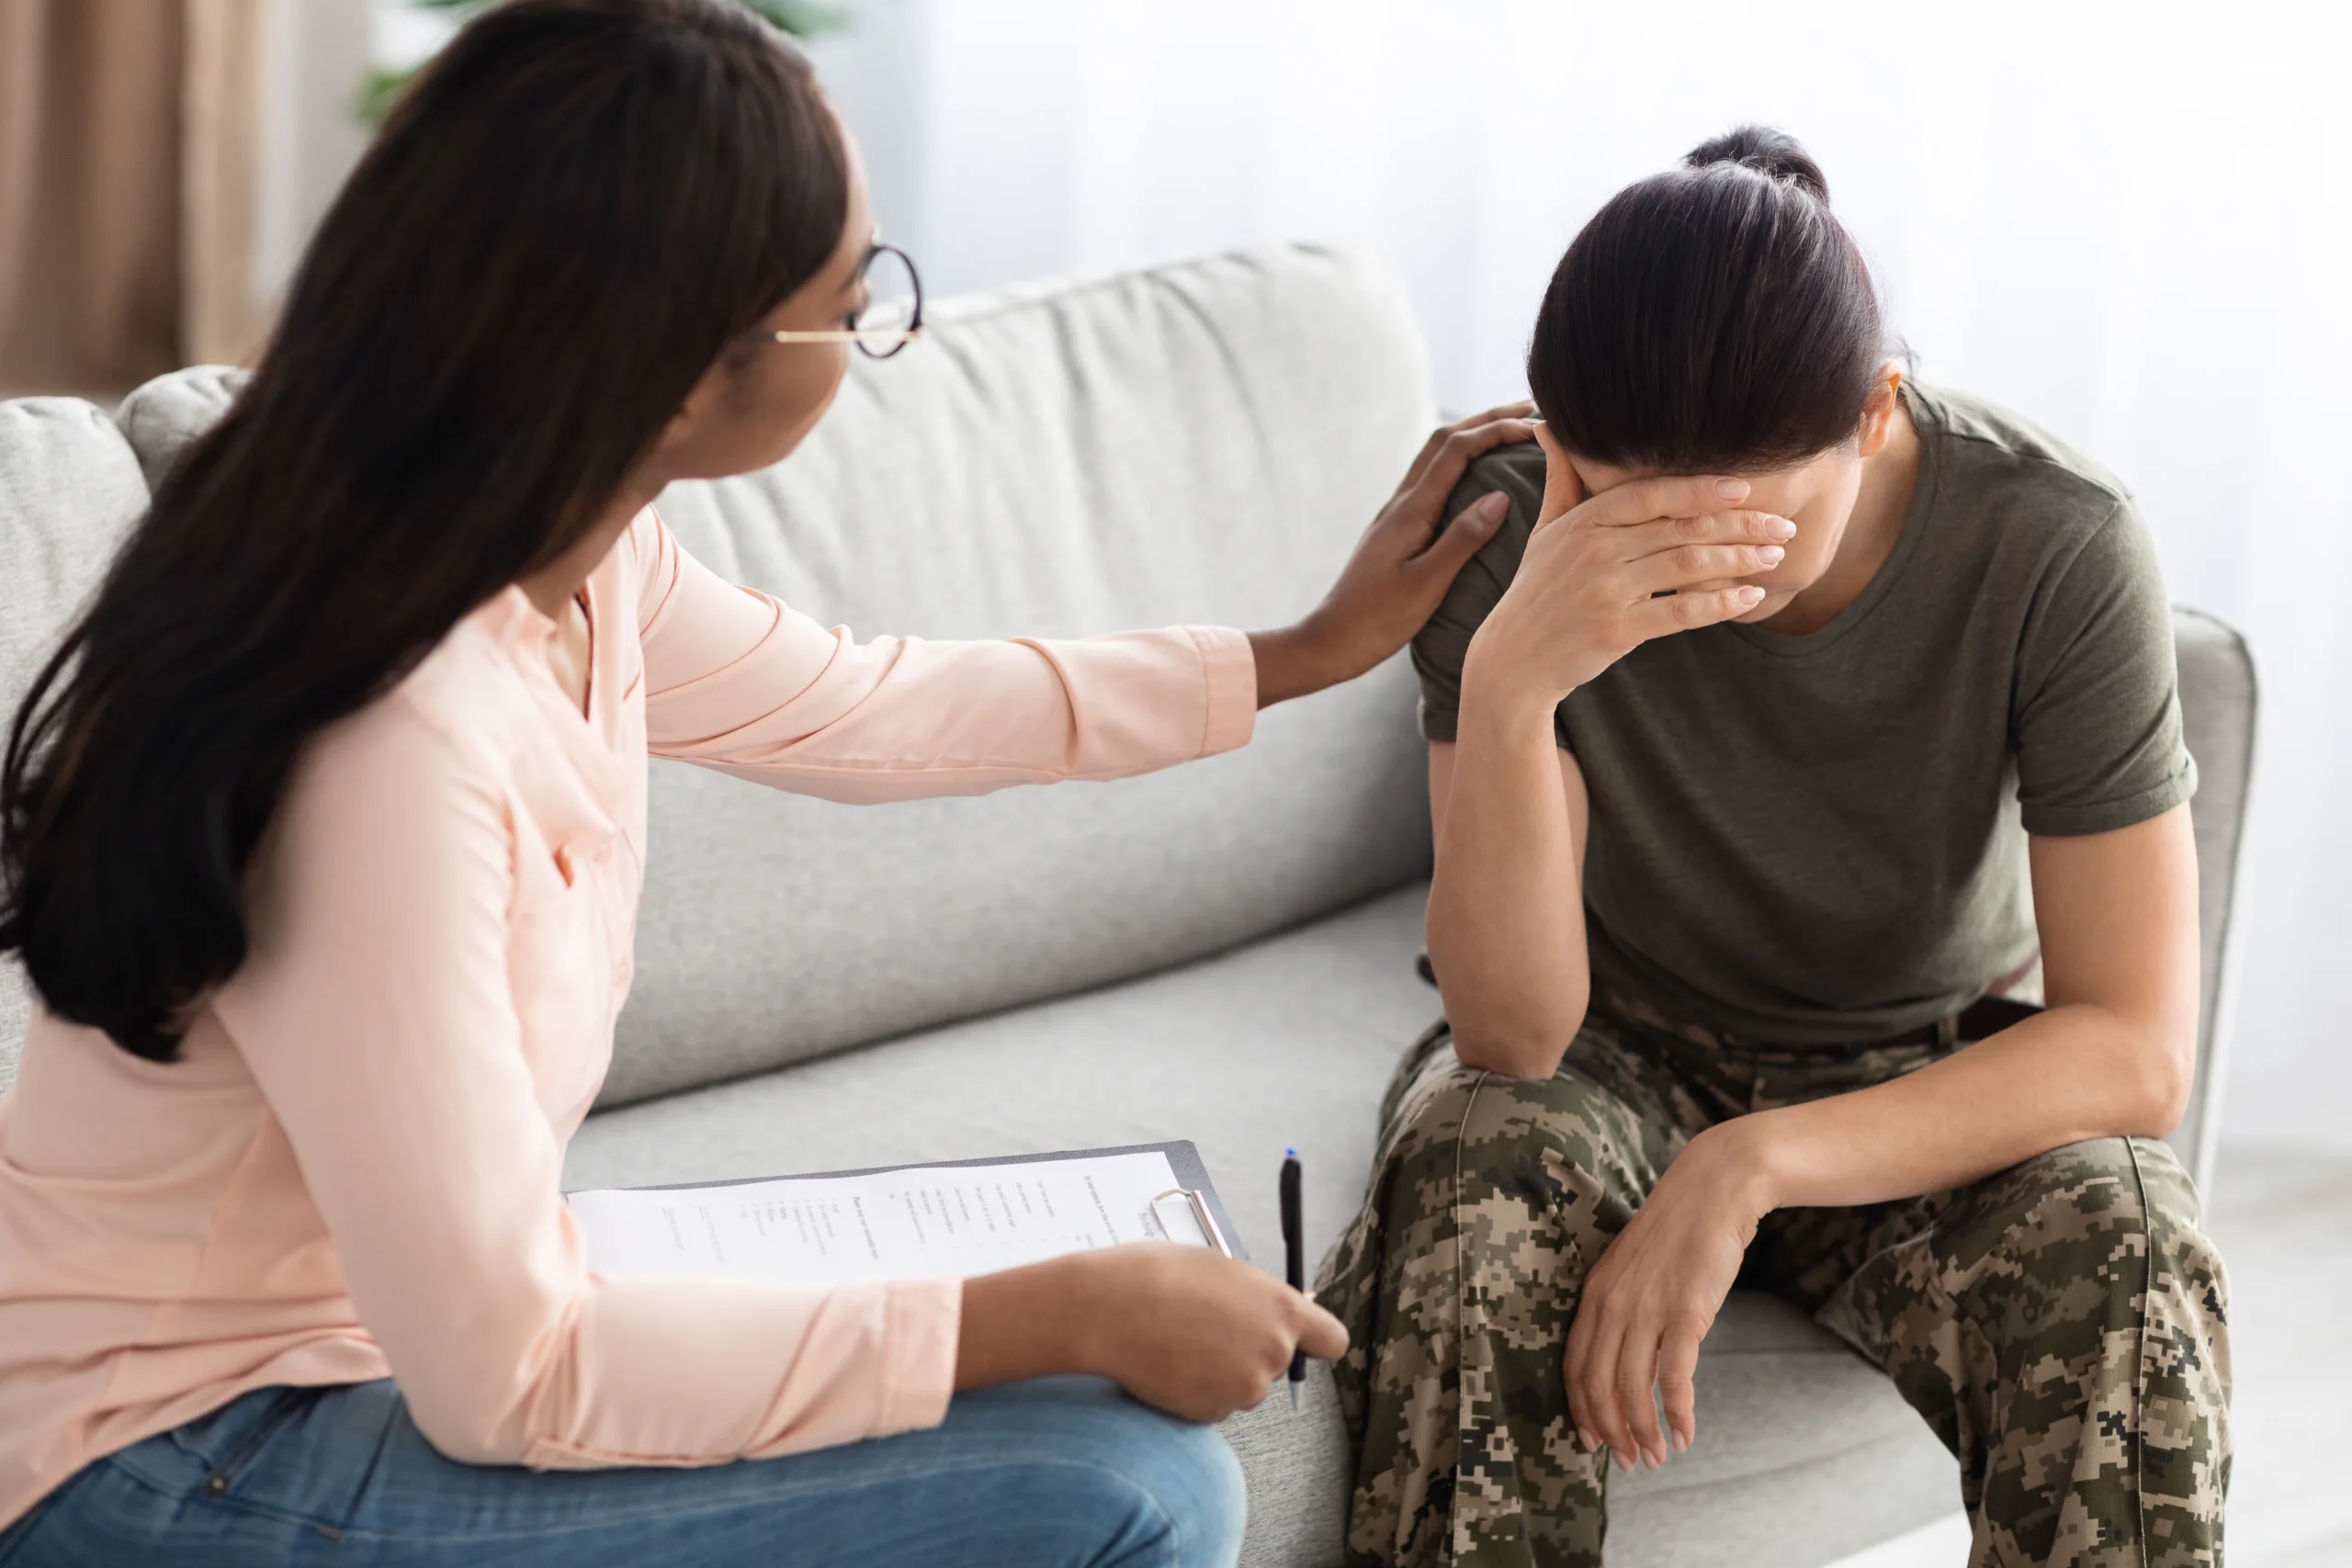 Black Psychologist Lady Comforting Soldier Woman In Uniform During Therapy Session In Office, Professional Psychotherapist Supporting Depressed Military Female Suffering Mental Problems, Closeup